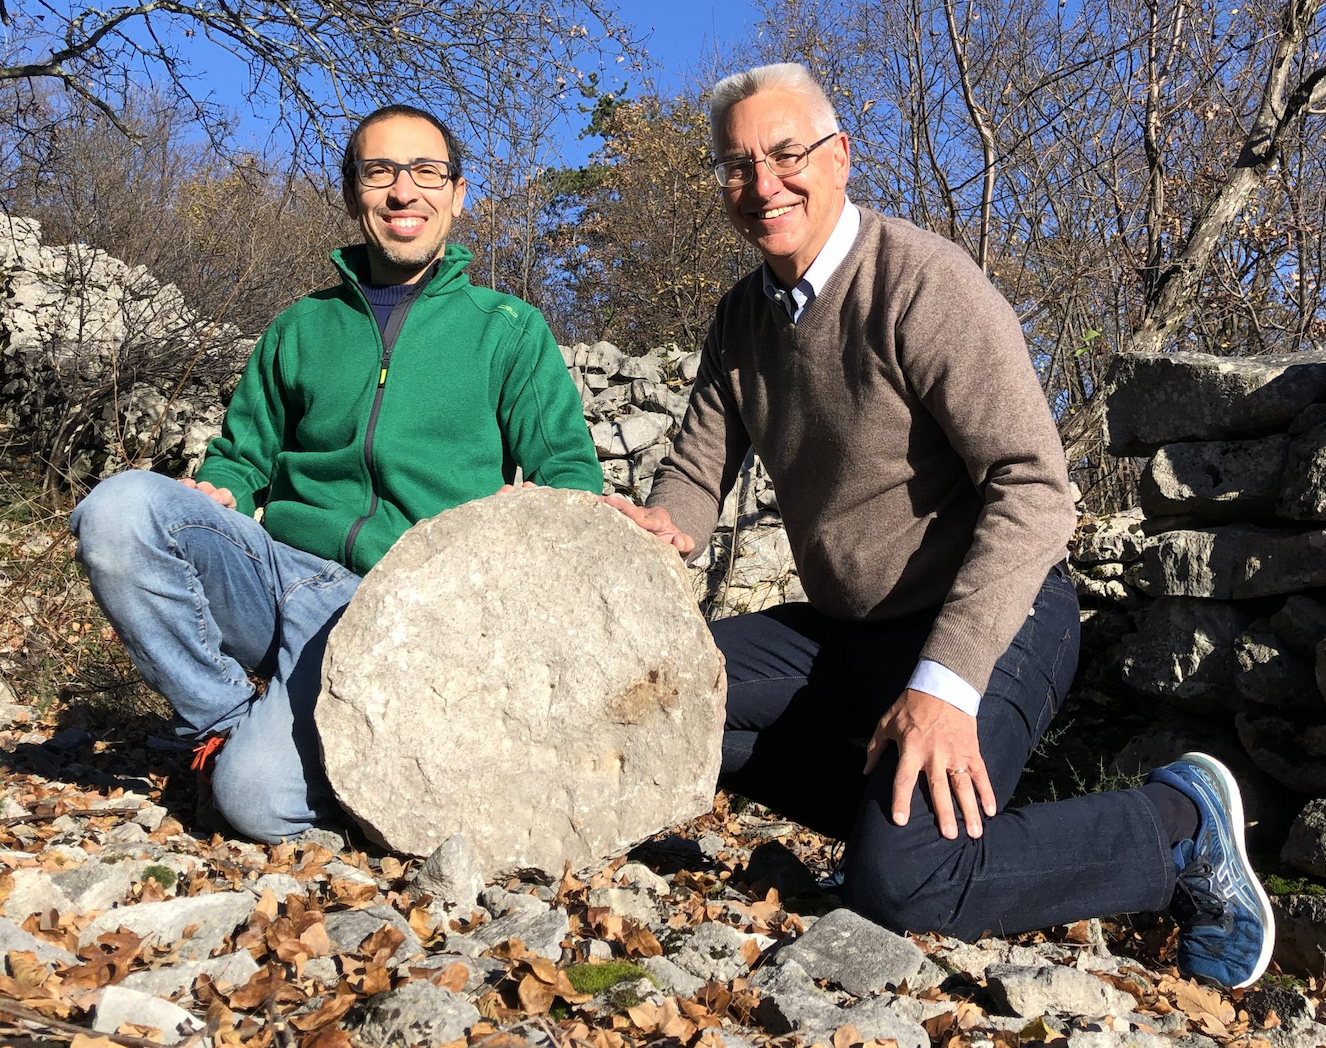 From the left, the archaeologist Federico Bernardini and the astronomer Paolo Molaro at the Castelliere di Rupinpiccolo, with what could be the oldest celestial map ever discovered